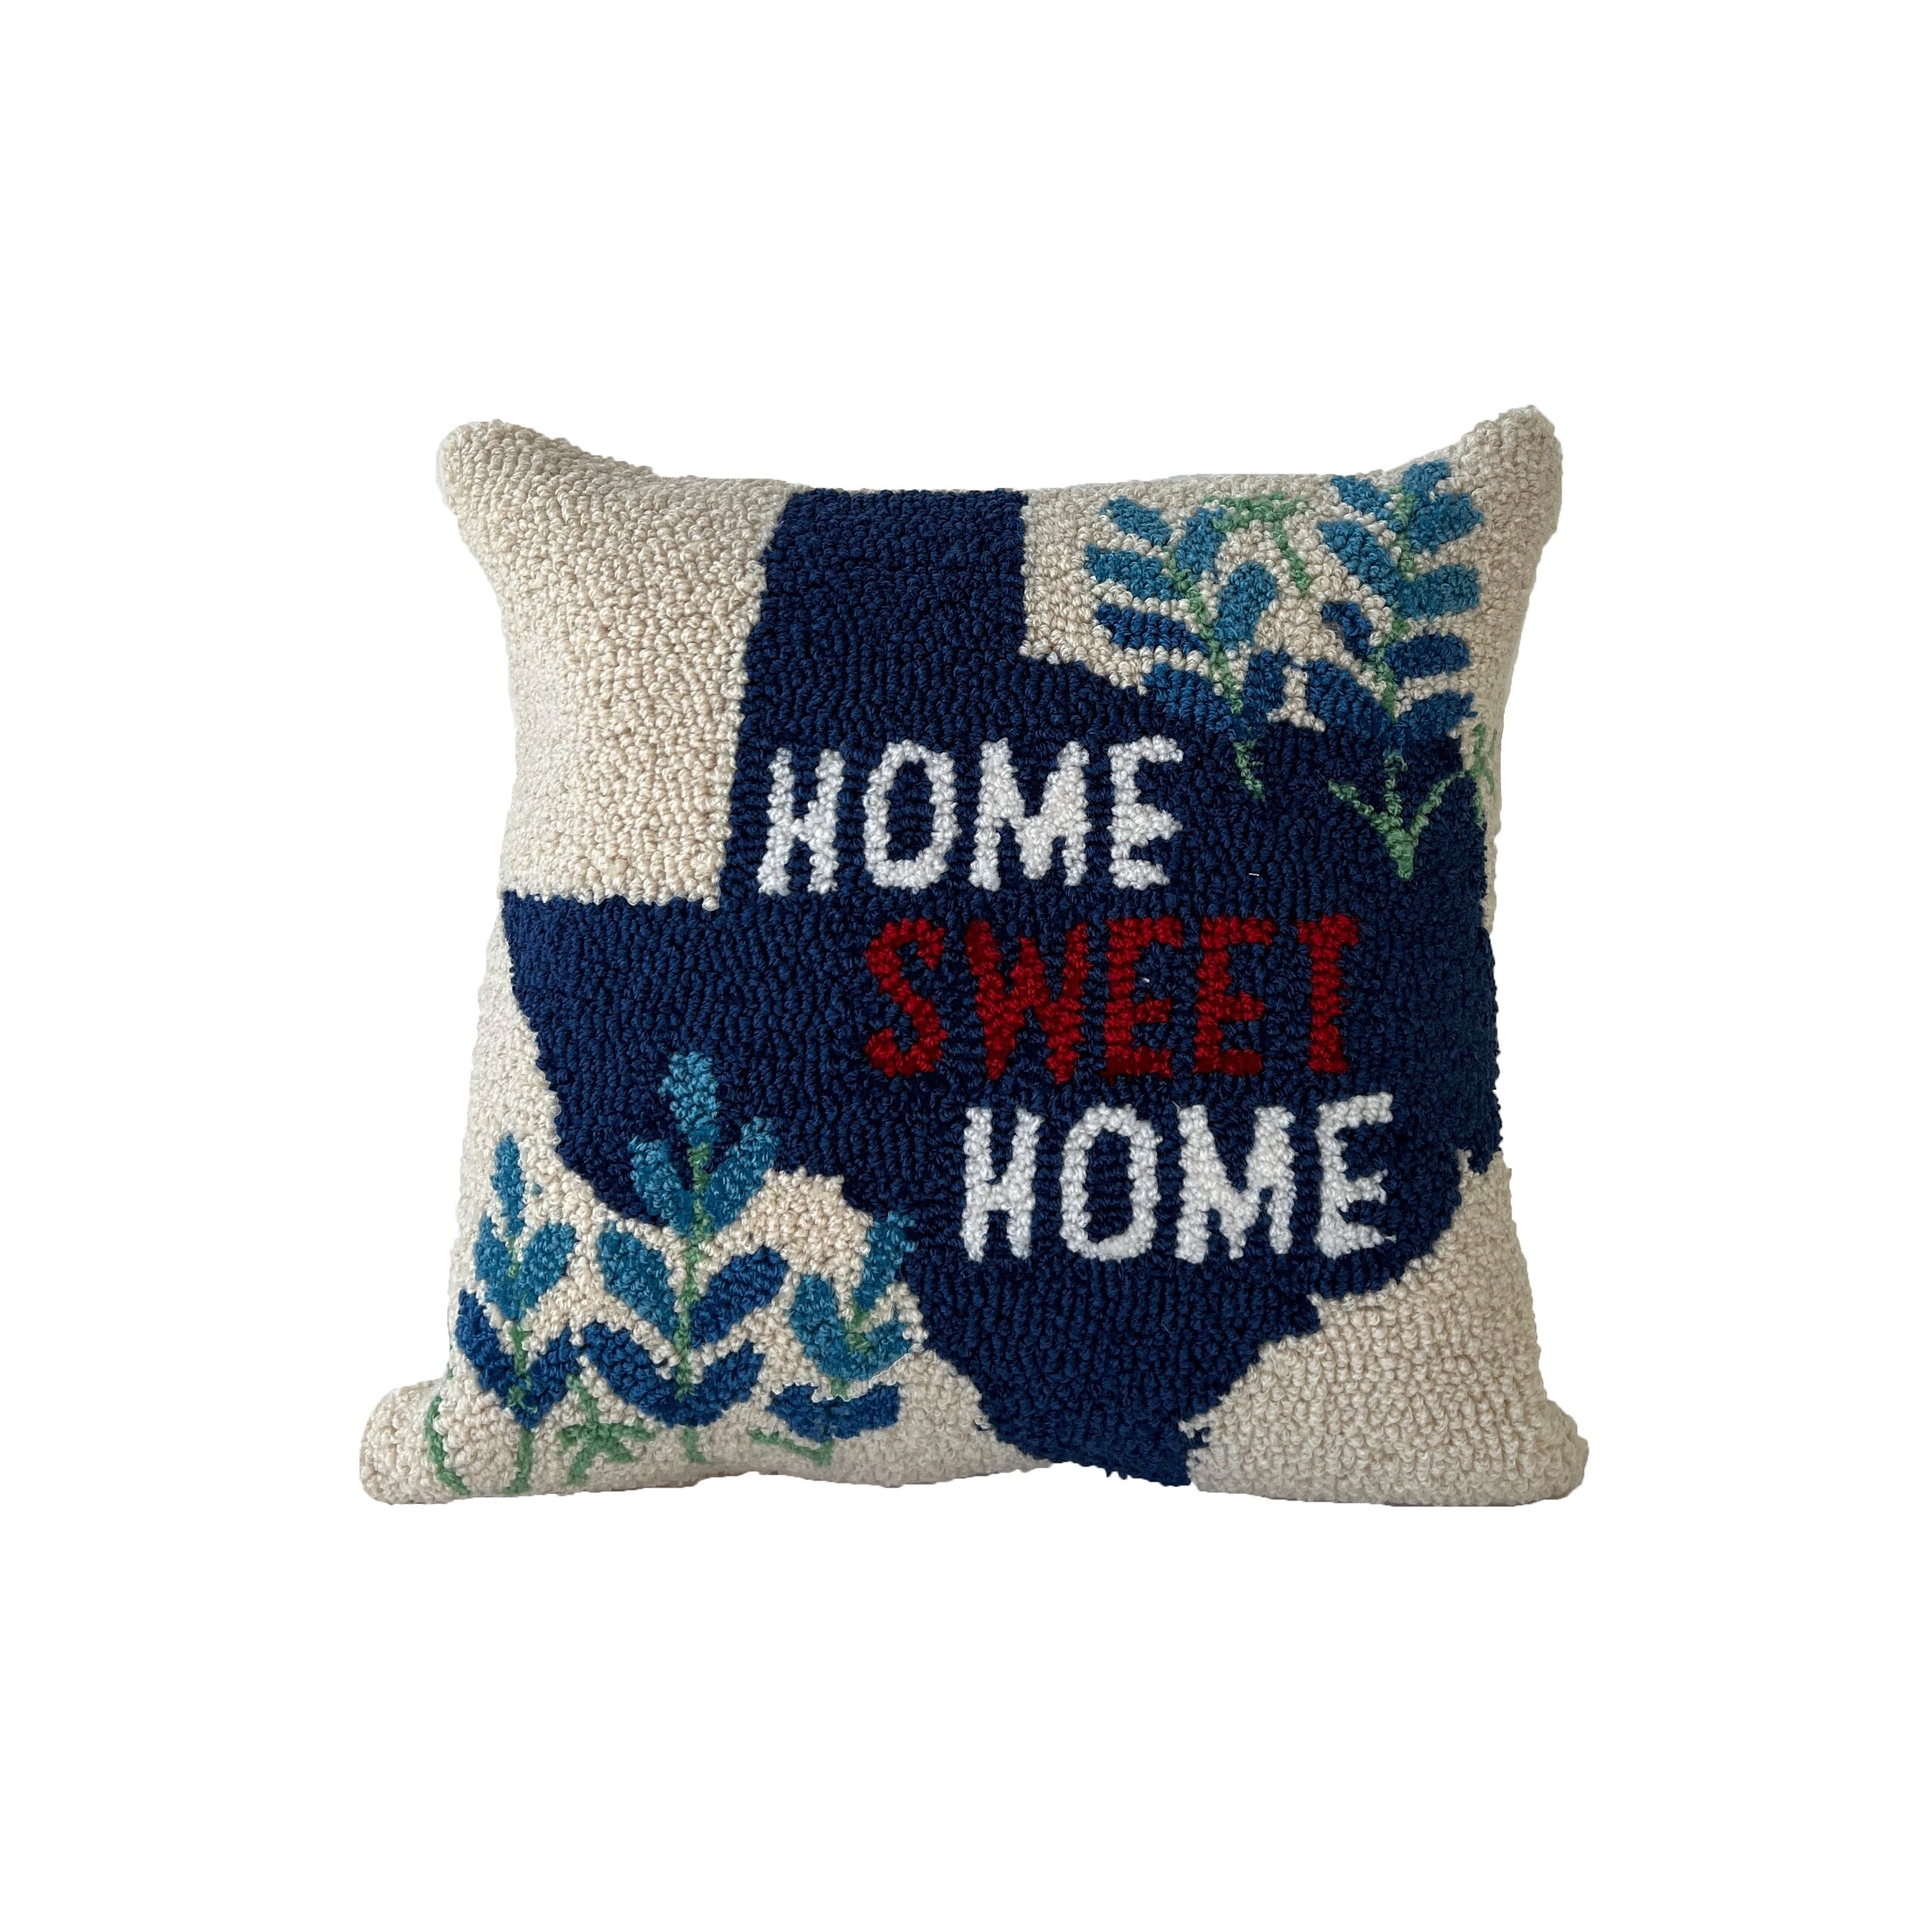 Outdoor Toss Pillows White/Red With Flowers "Home Sweet Home" Set Of 2 16X16 